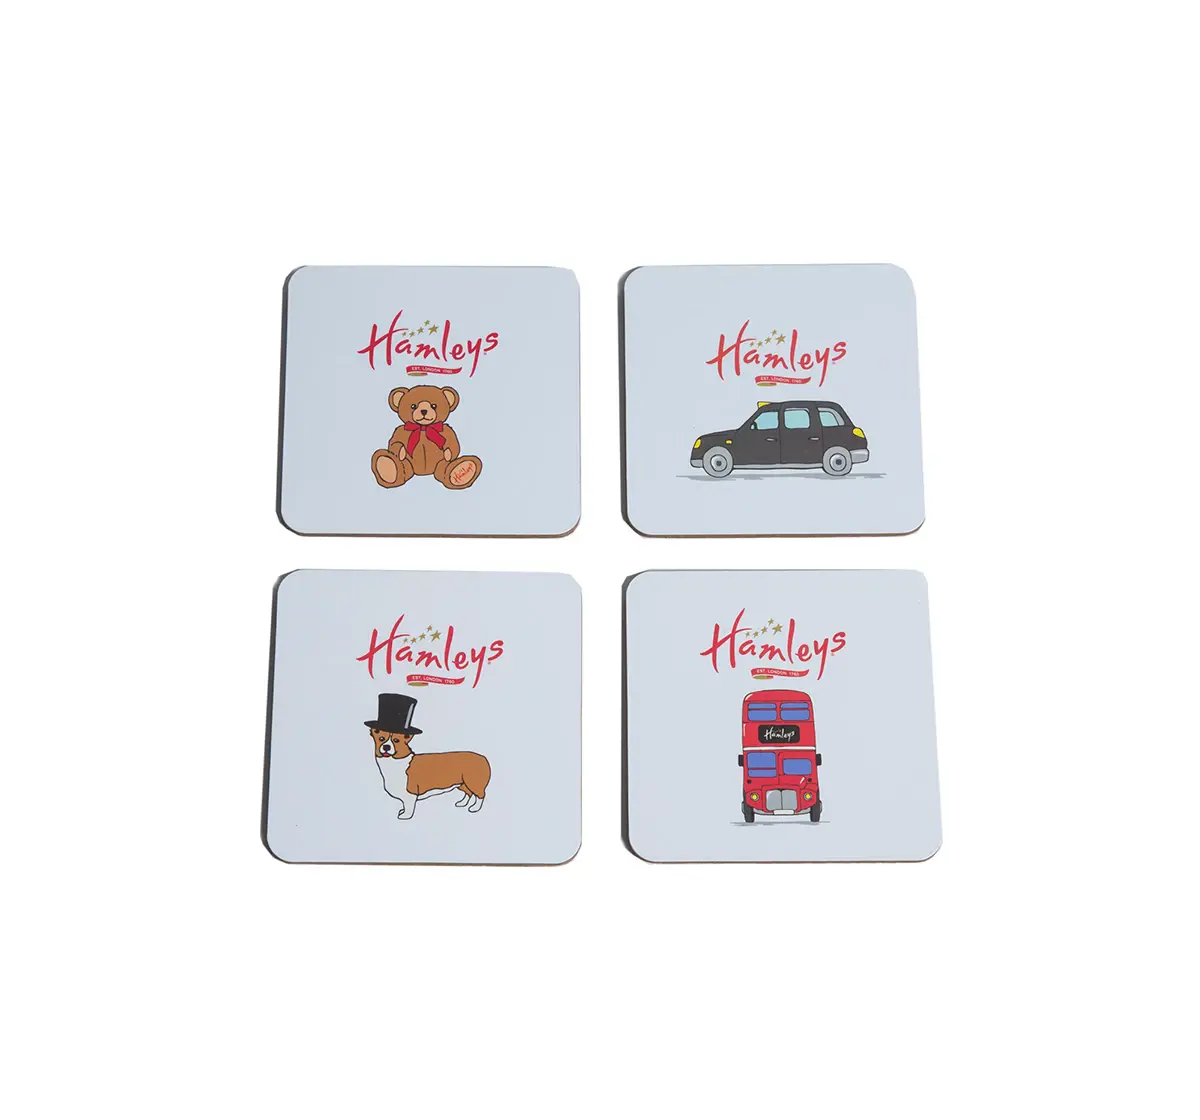 Hamleys® Toys & Gifts for Kids - Apps on Google Play